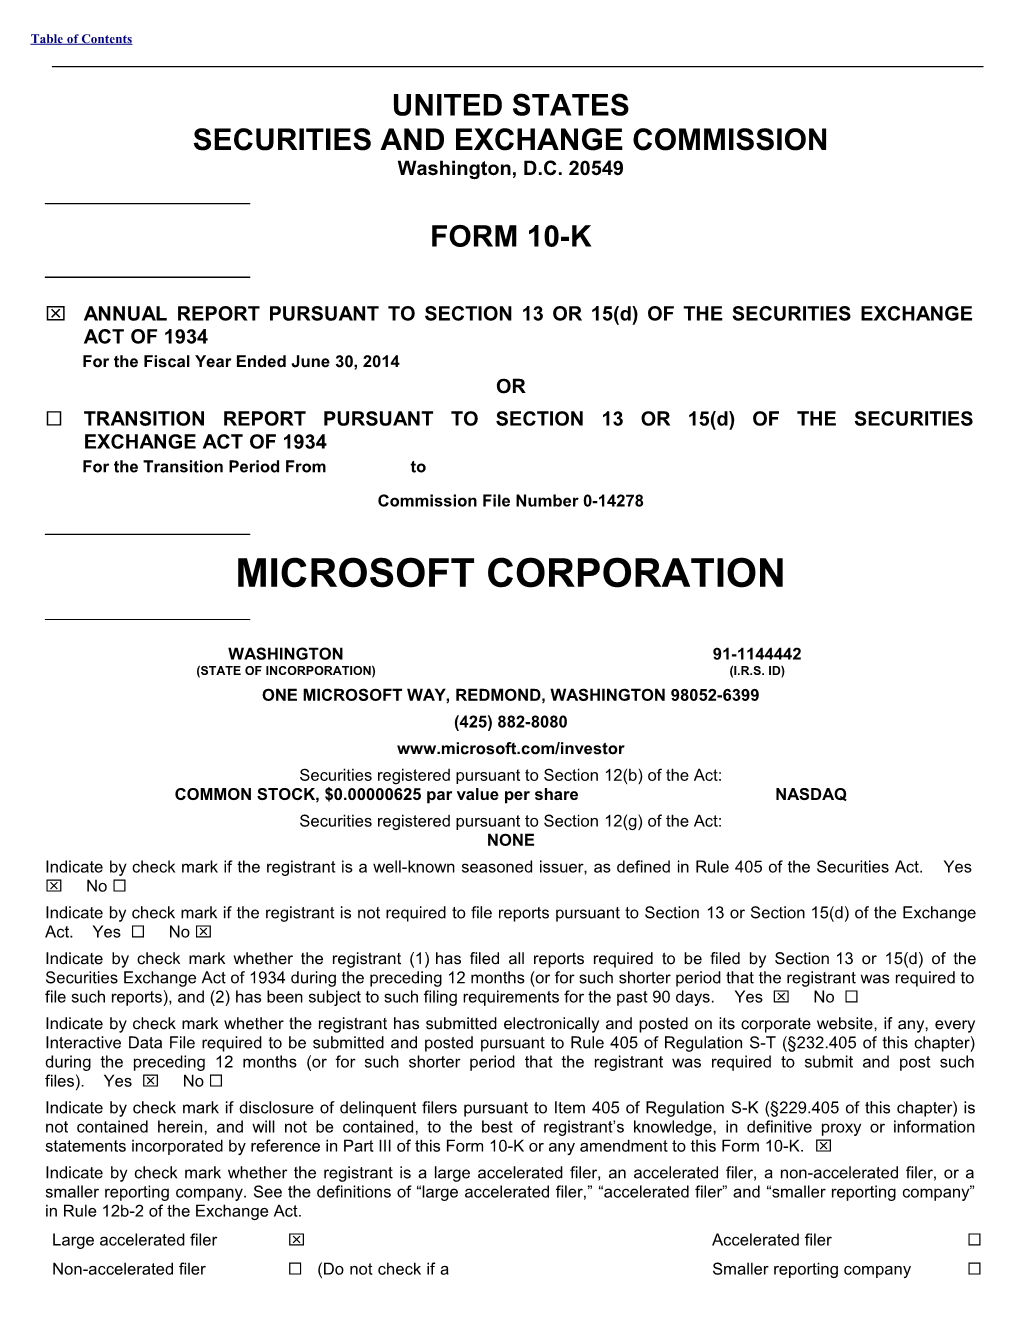 MICROSOFT CORP (Form: 10-K, Received: 07/31/2014 17:17:25)